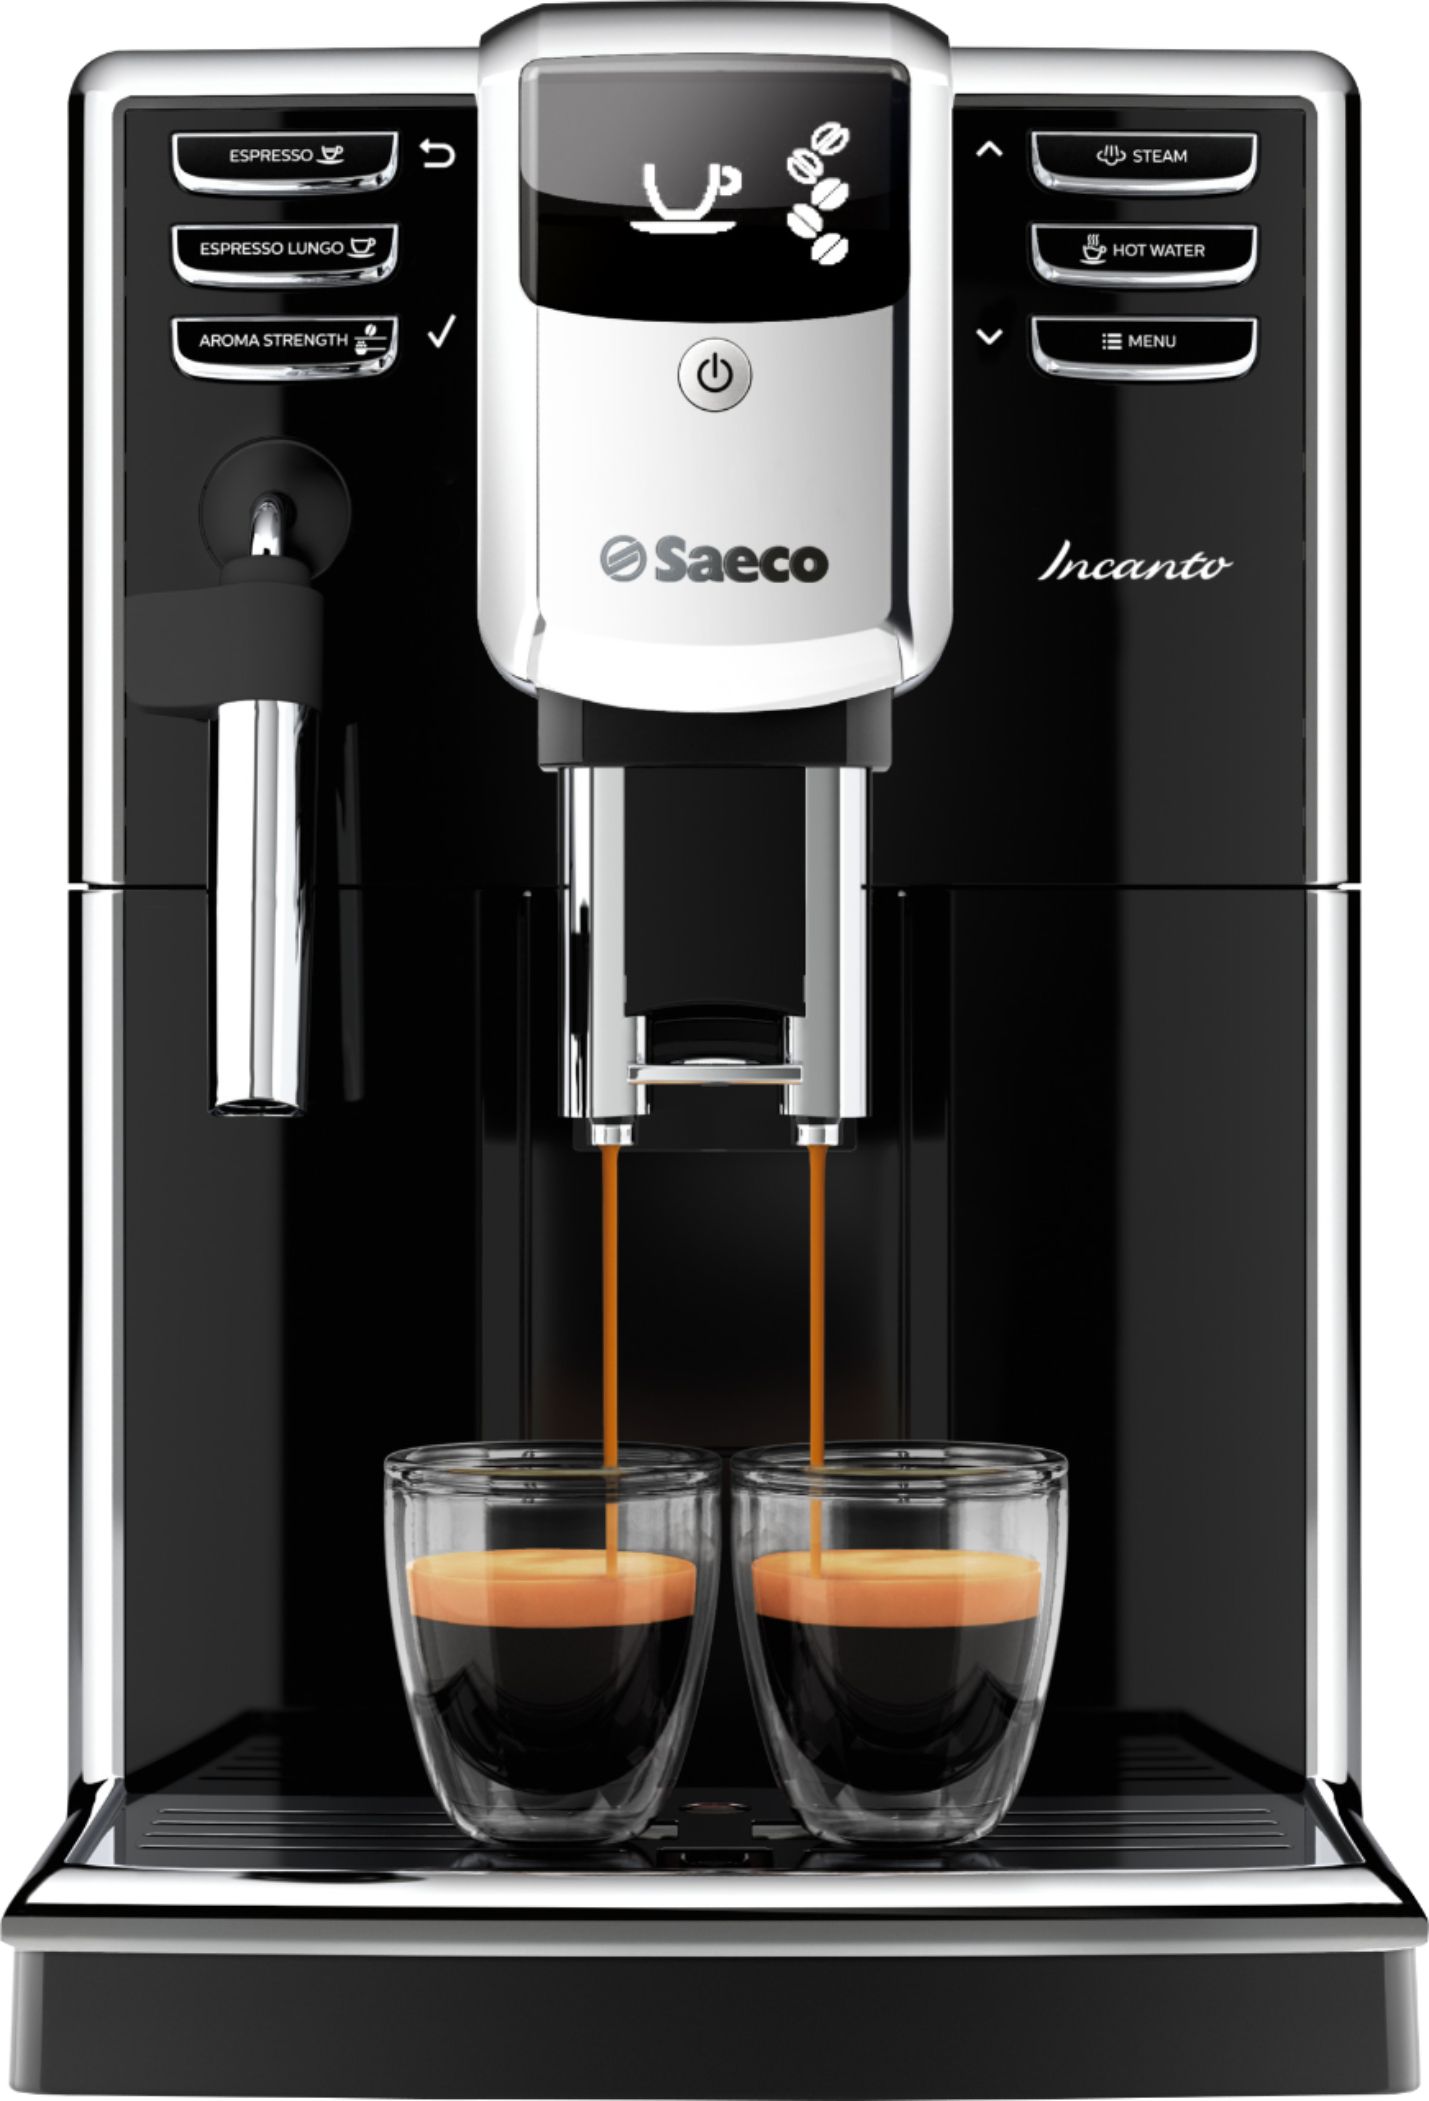 terrorist Earliest Patent Best Buy: Saeco Incanto Espresso Machine with 15 bars of pressure, Milk  Frother and intergrated grinder Black HD8911/48